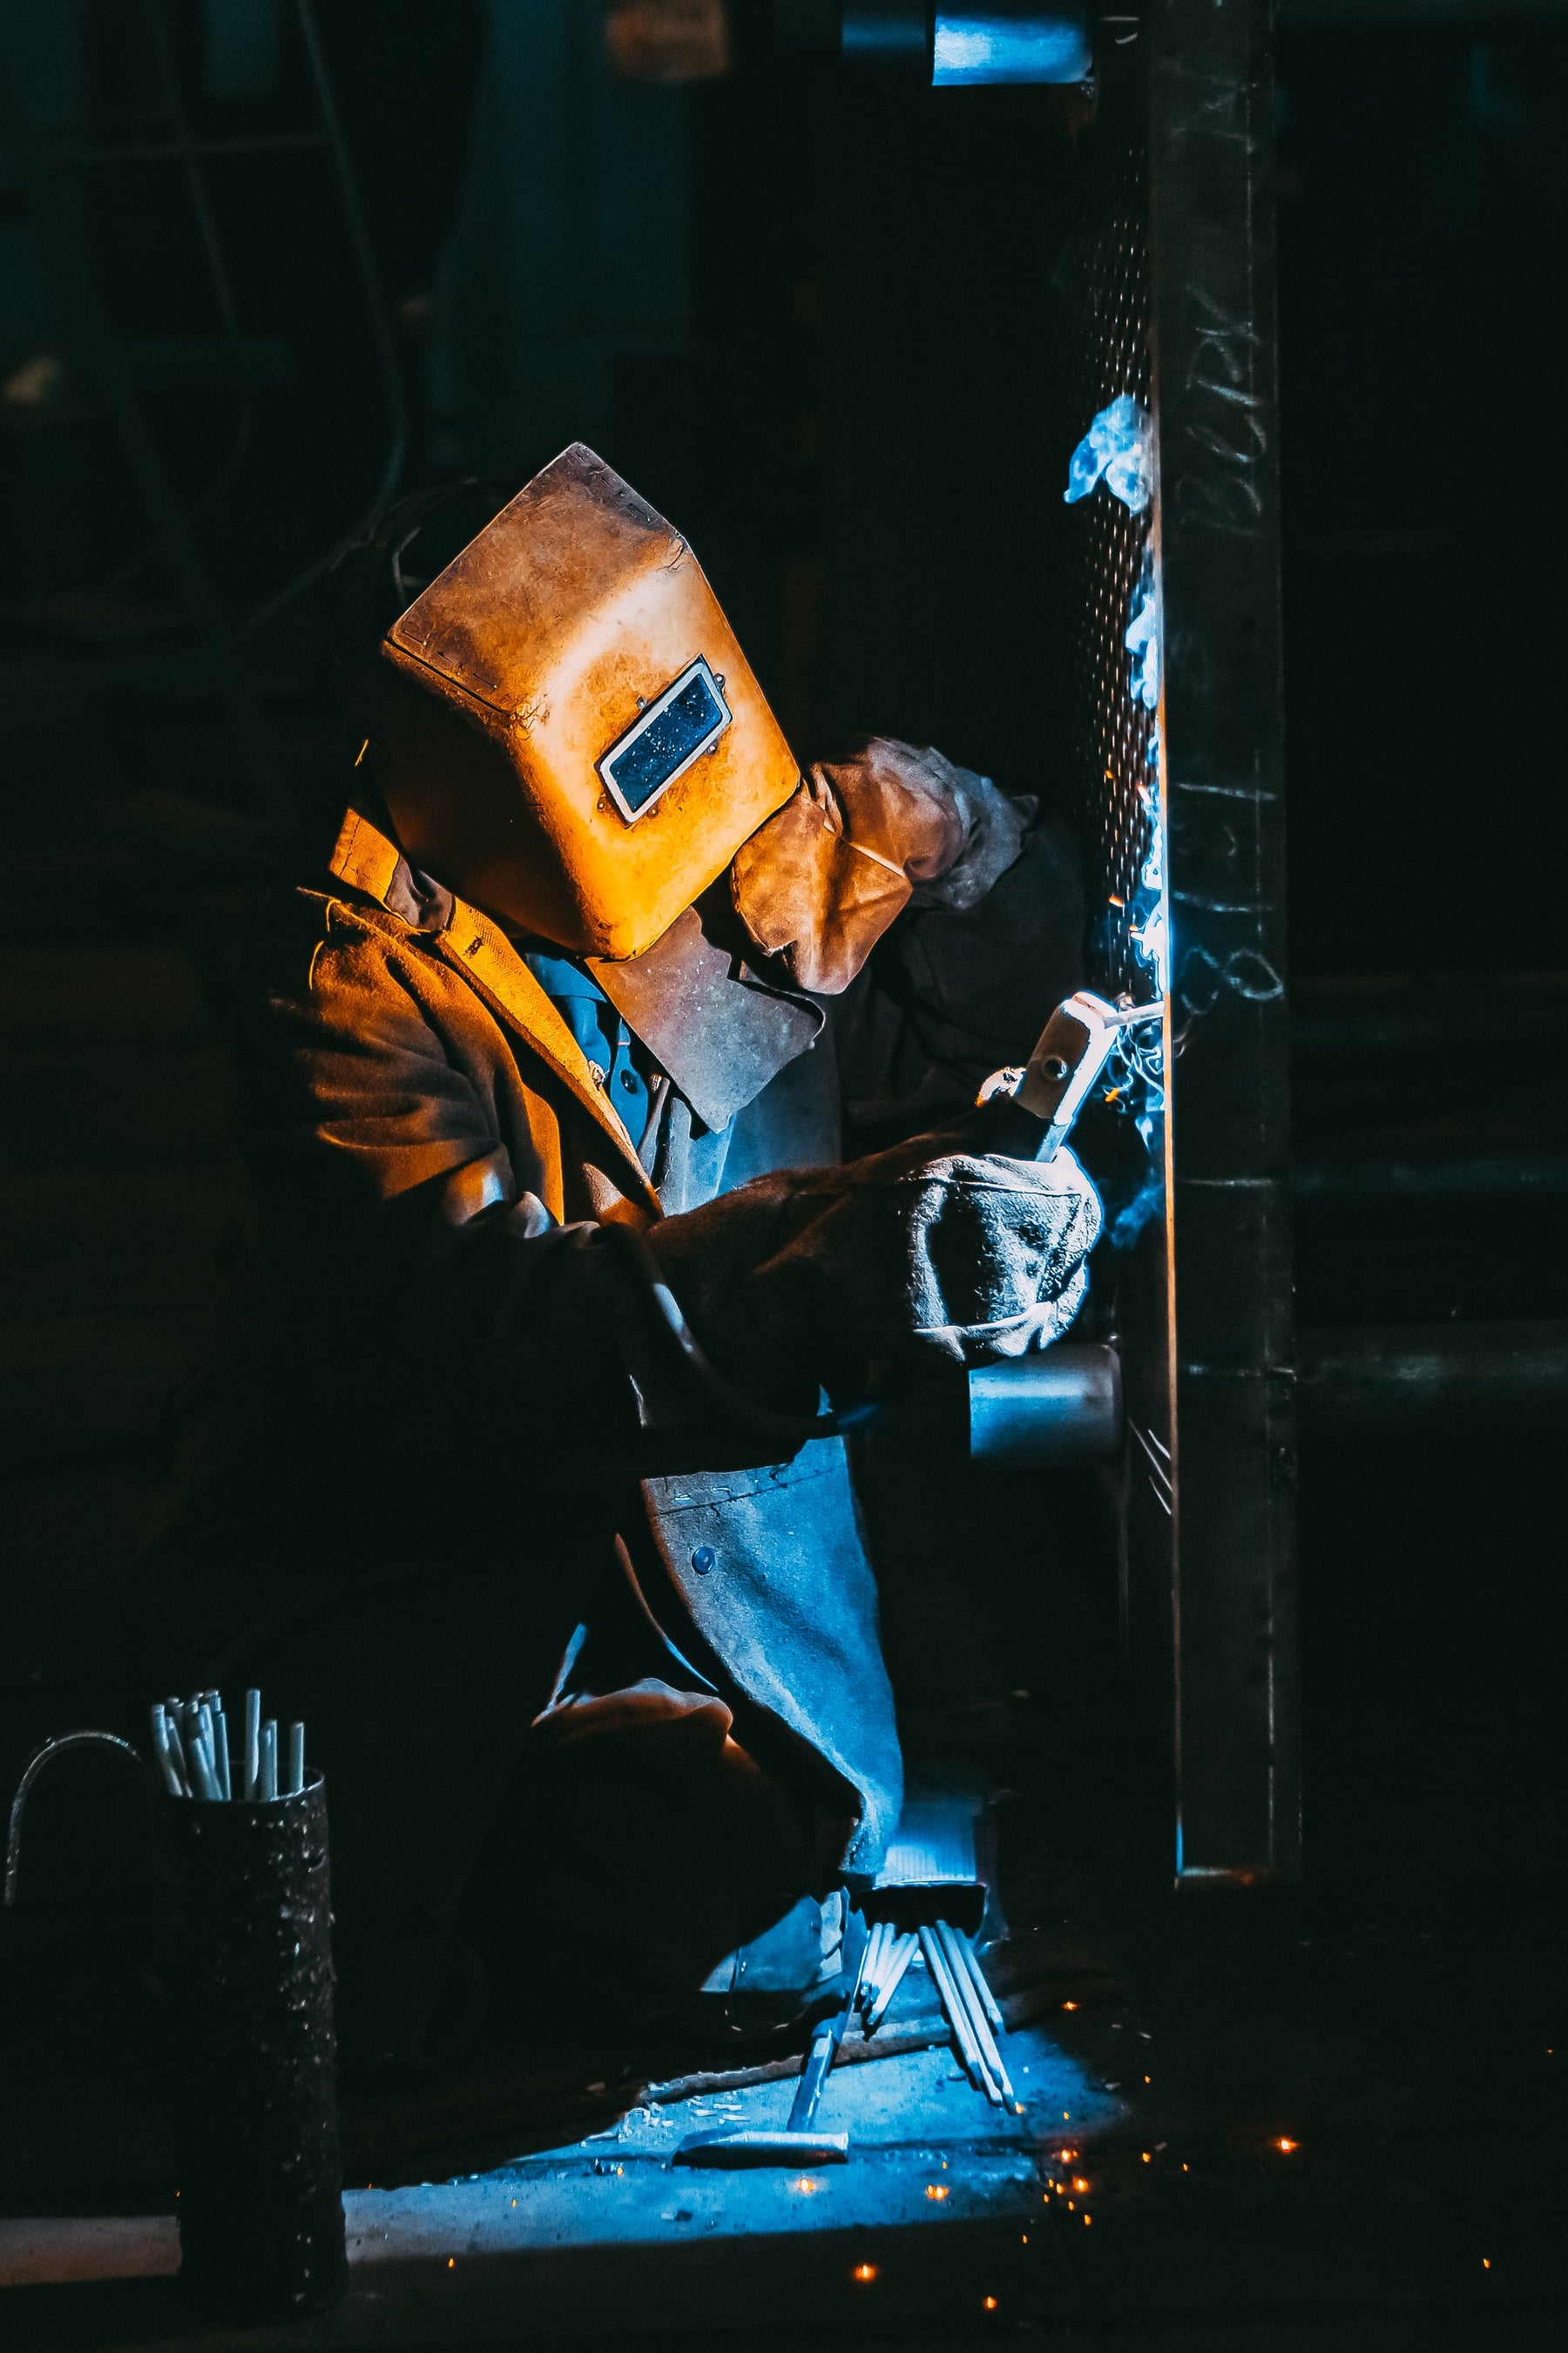 A person doing welding work by wearing essential PPE